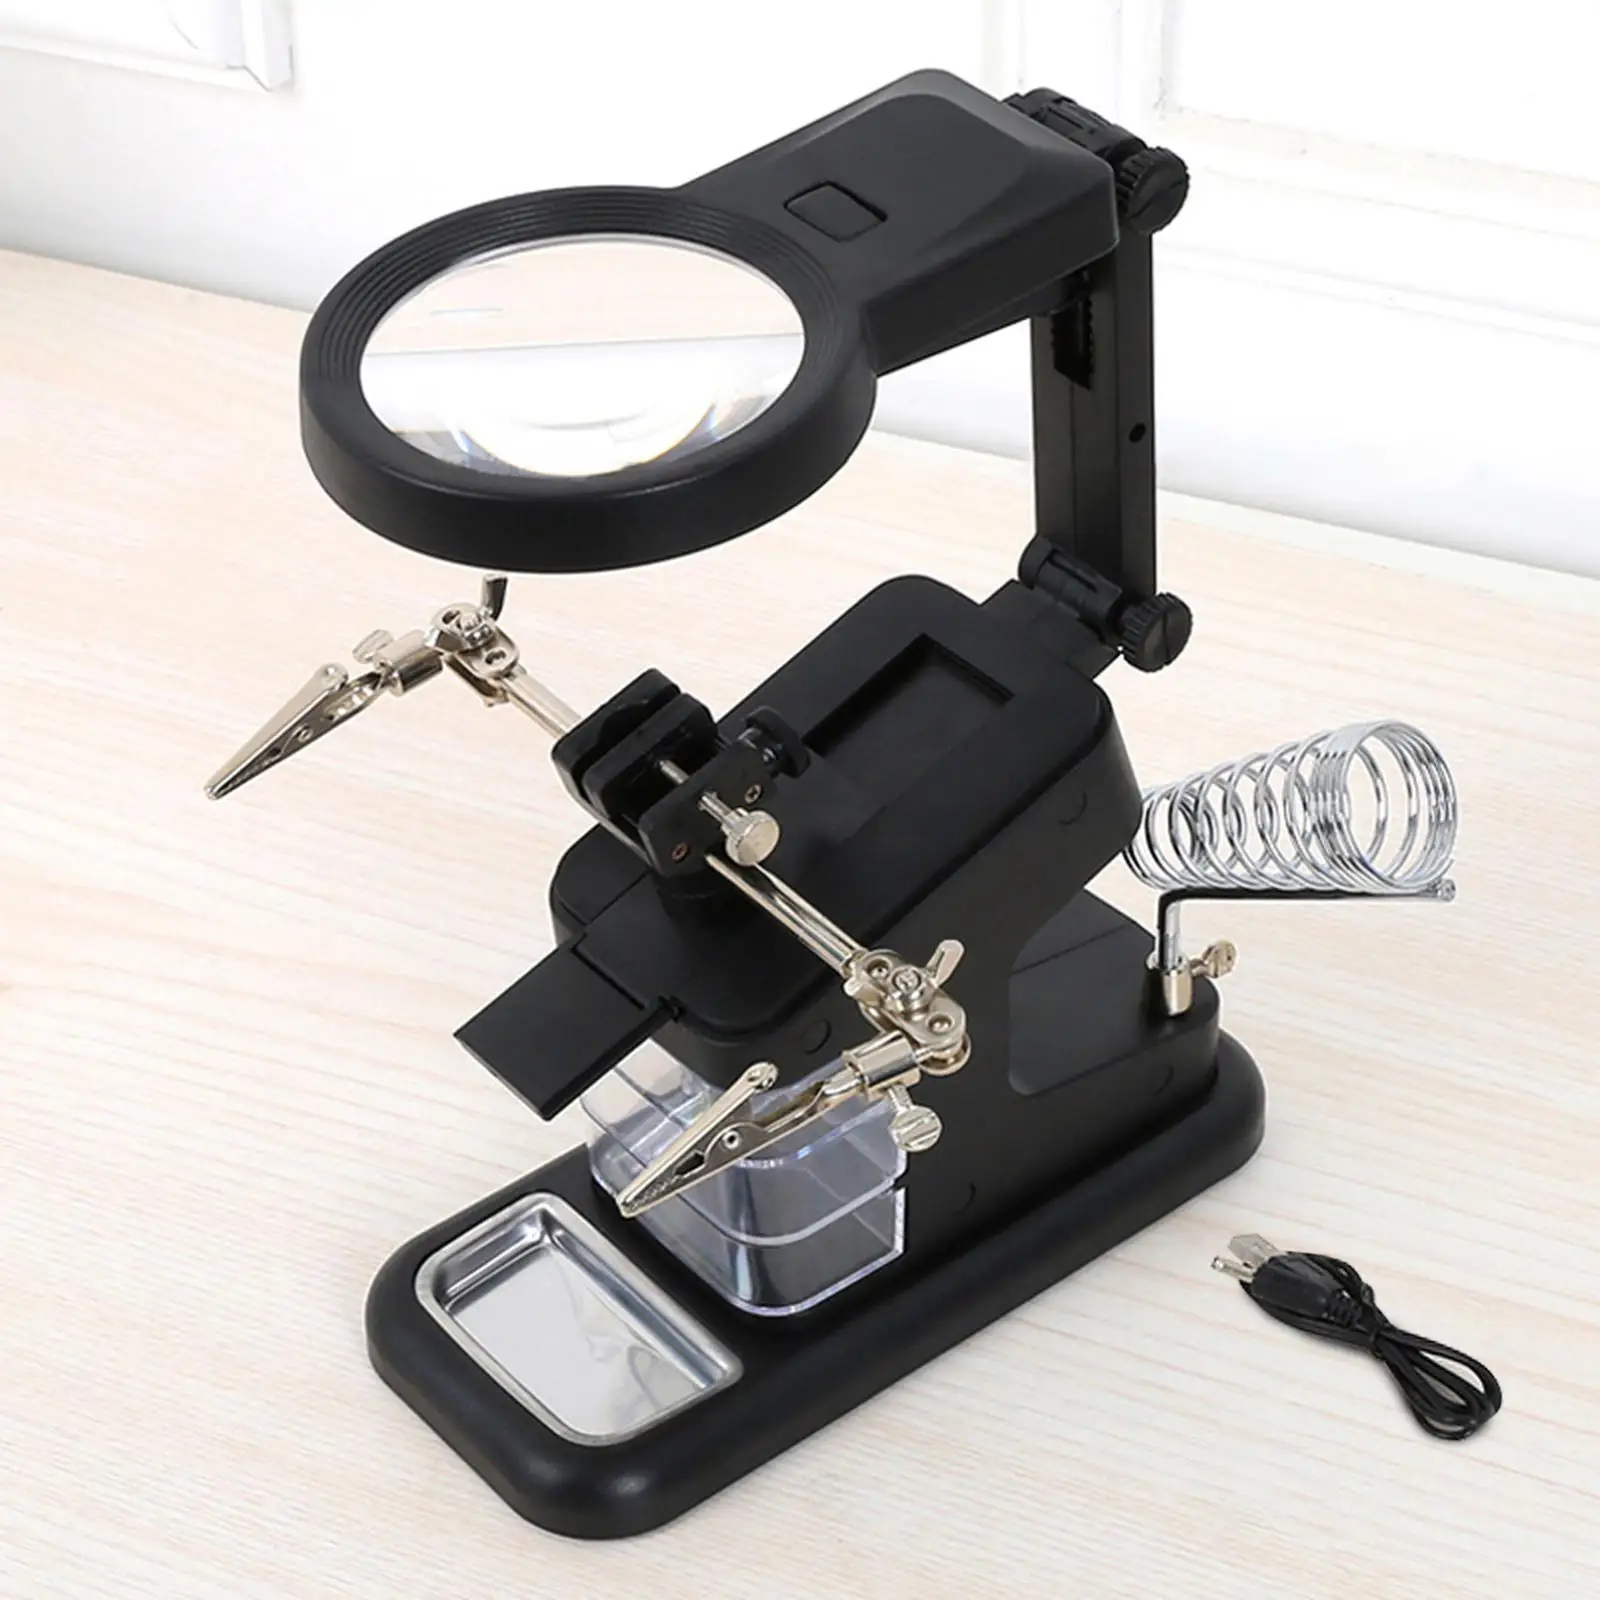 Magnifier Stand with Clip Clamp Base Desktop Magnify Glass for Welding Crafts Rework